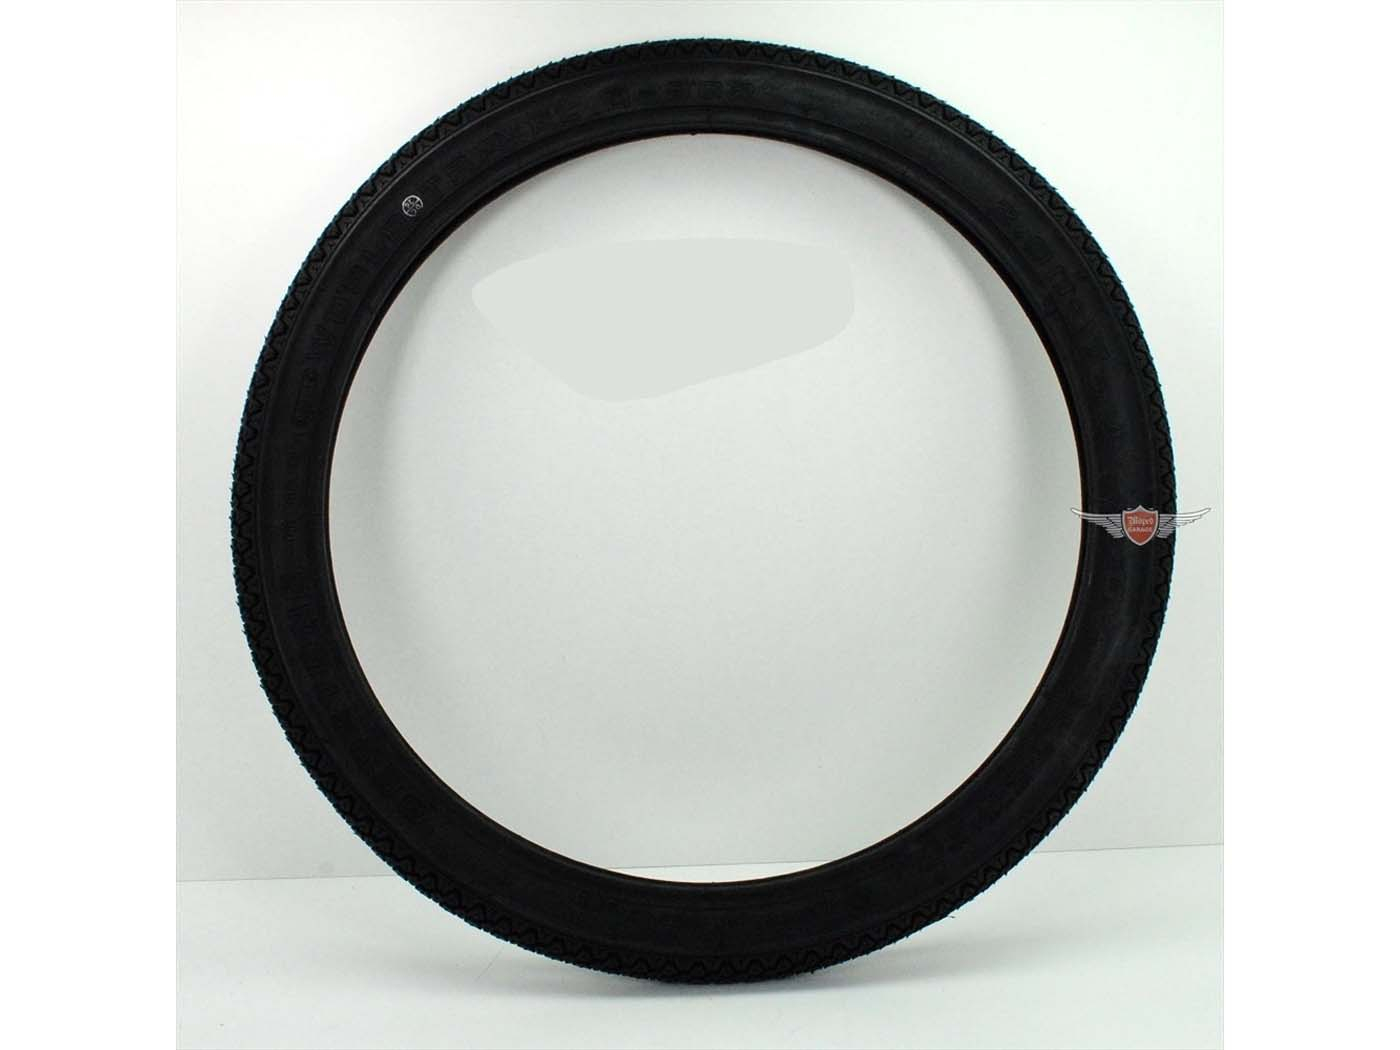 Tires, Classic 2 X 17 Inch 21 2.0 Up To 120 Km/h For Peugeot 103, Hercules, Zündapp, DKW, Kreidler, Miele, KTM, Puch